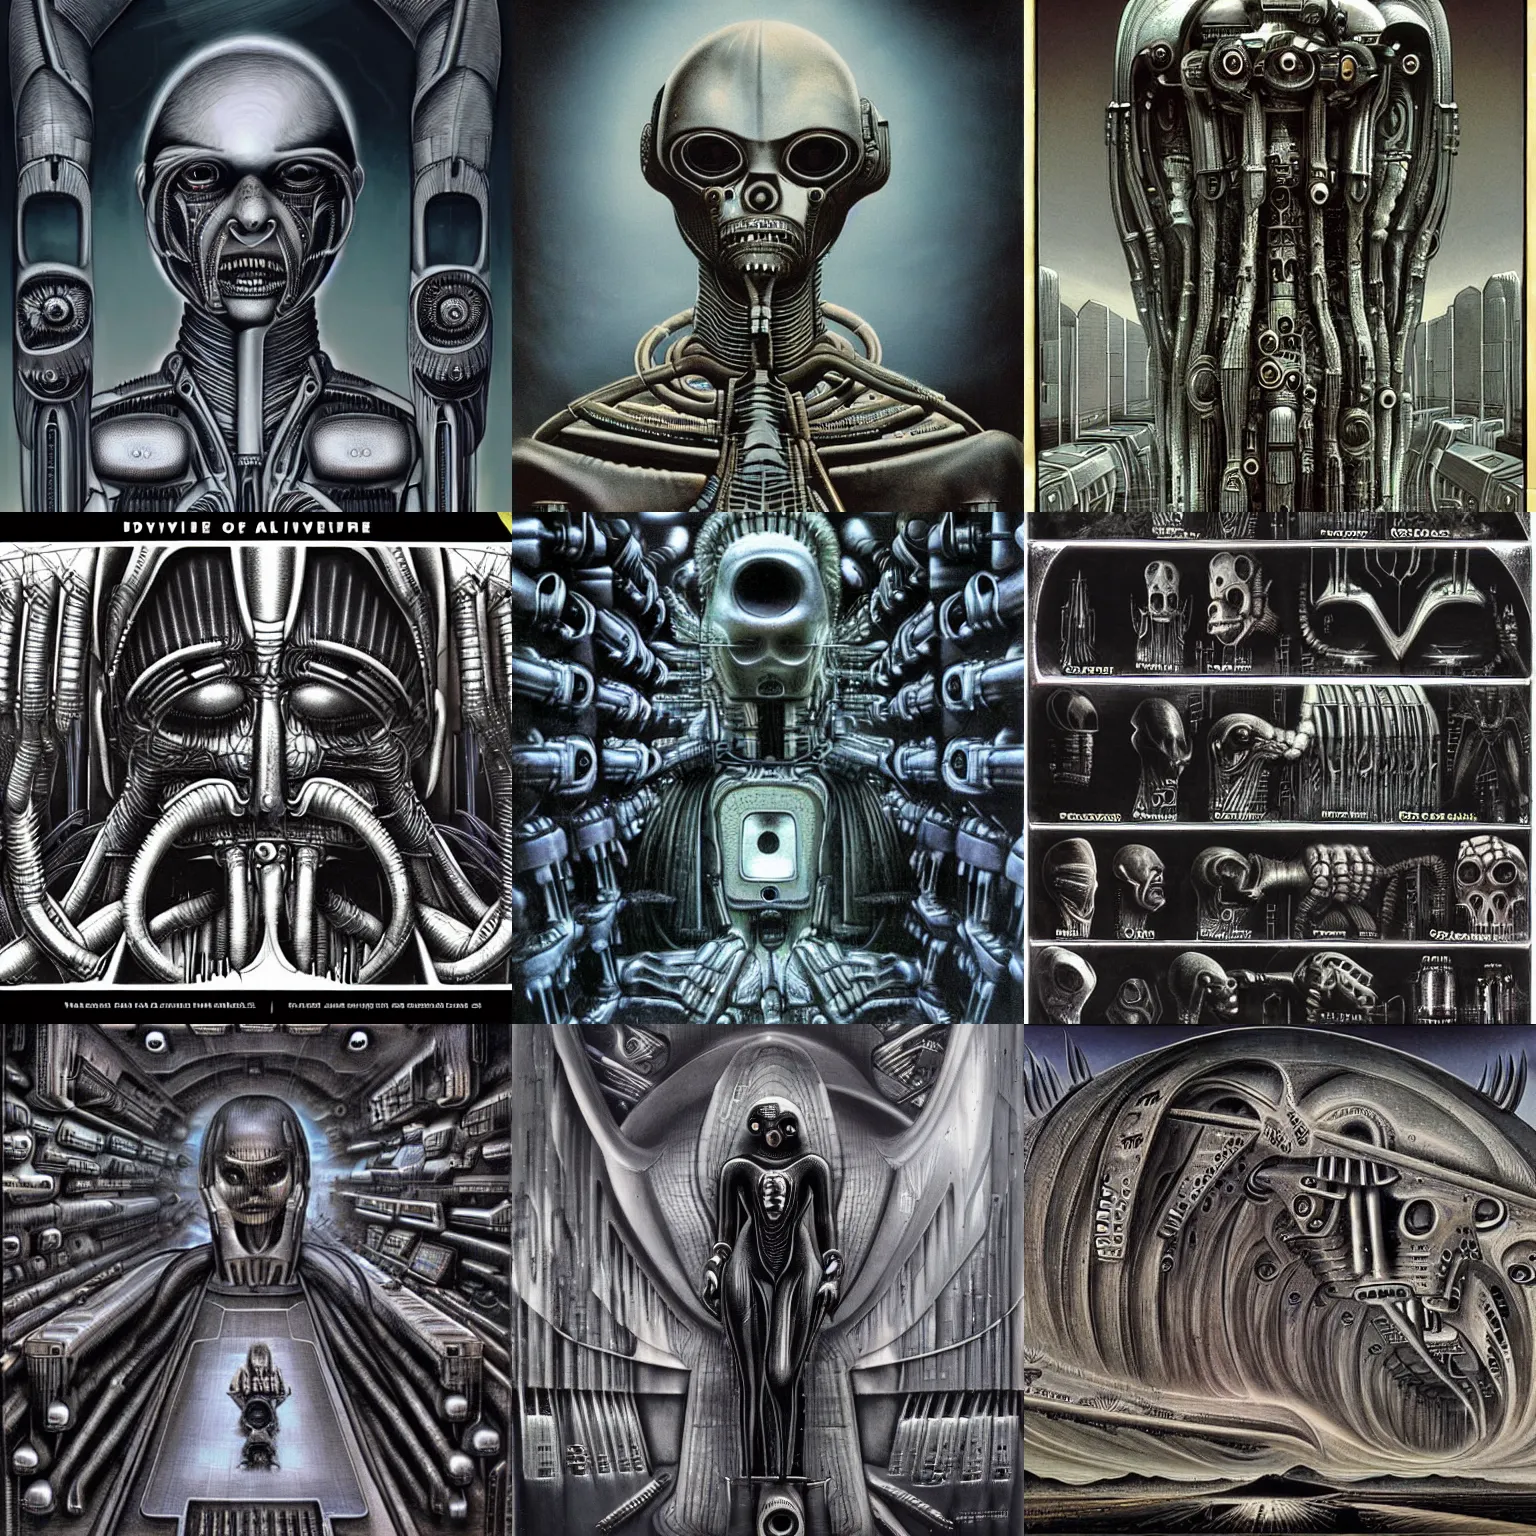 Prompt: universe 25 dystopian future of society, made by H. R. Giger